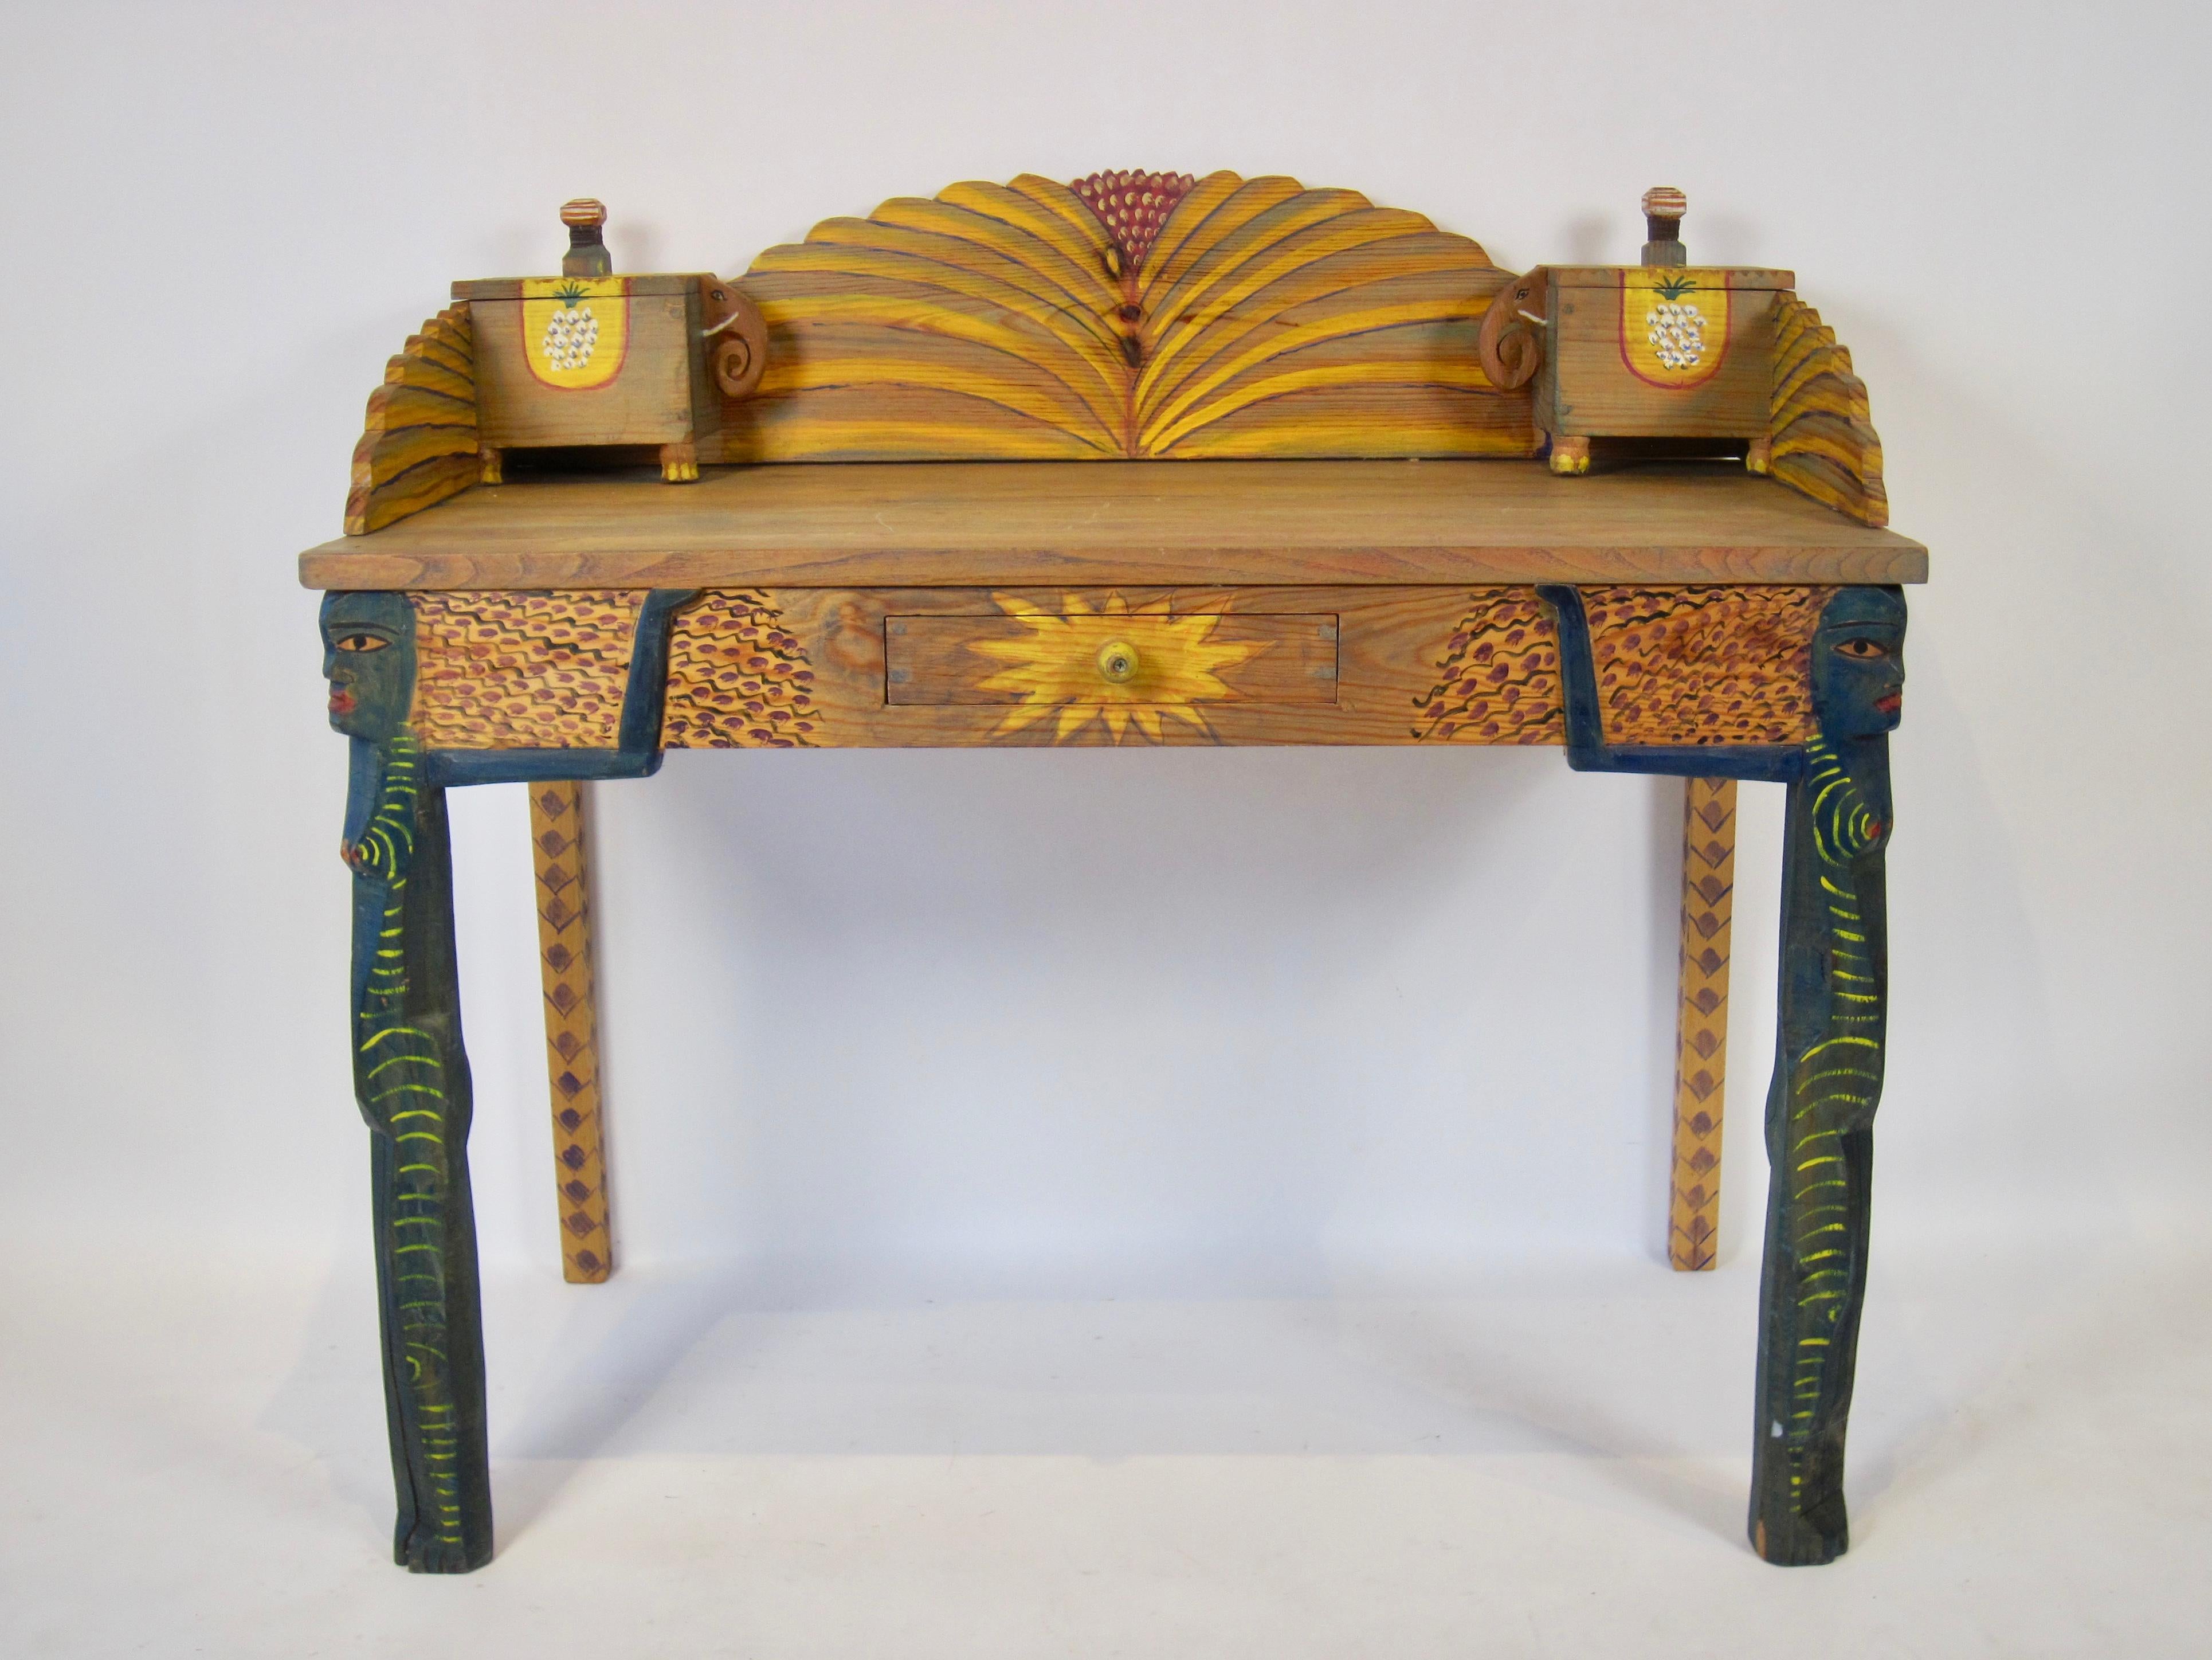 Gérard Rigot's (b.1929) colorful hand painted oak Folk Art desk. From the aboriginal women painted on the two front legs to the pineapples painted on the elephant storage boxes to the colorful patterns painted throughout this hand crafted piece, it